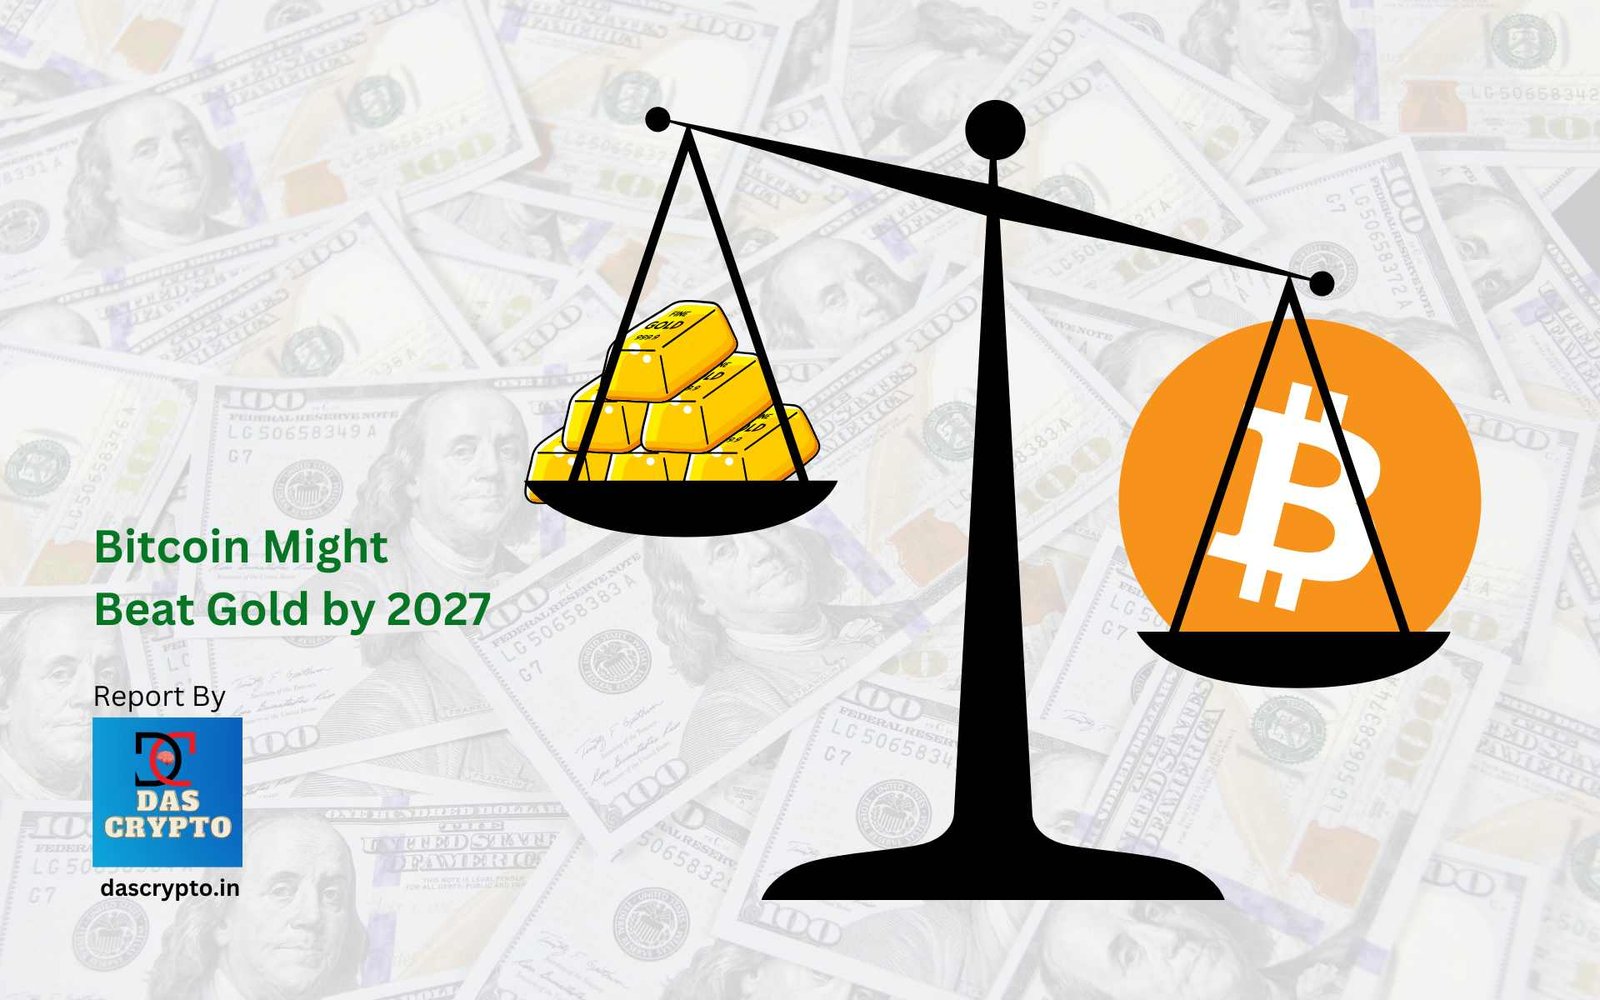 Bitcoin Beats Gold by 2027